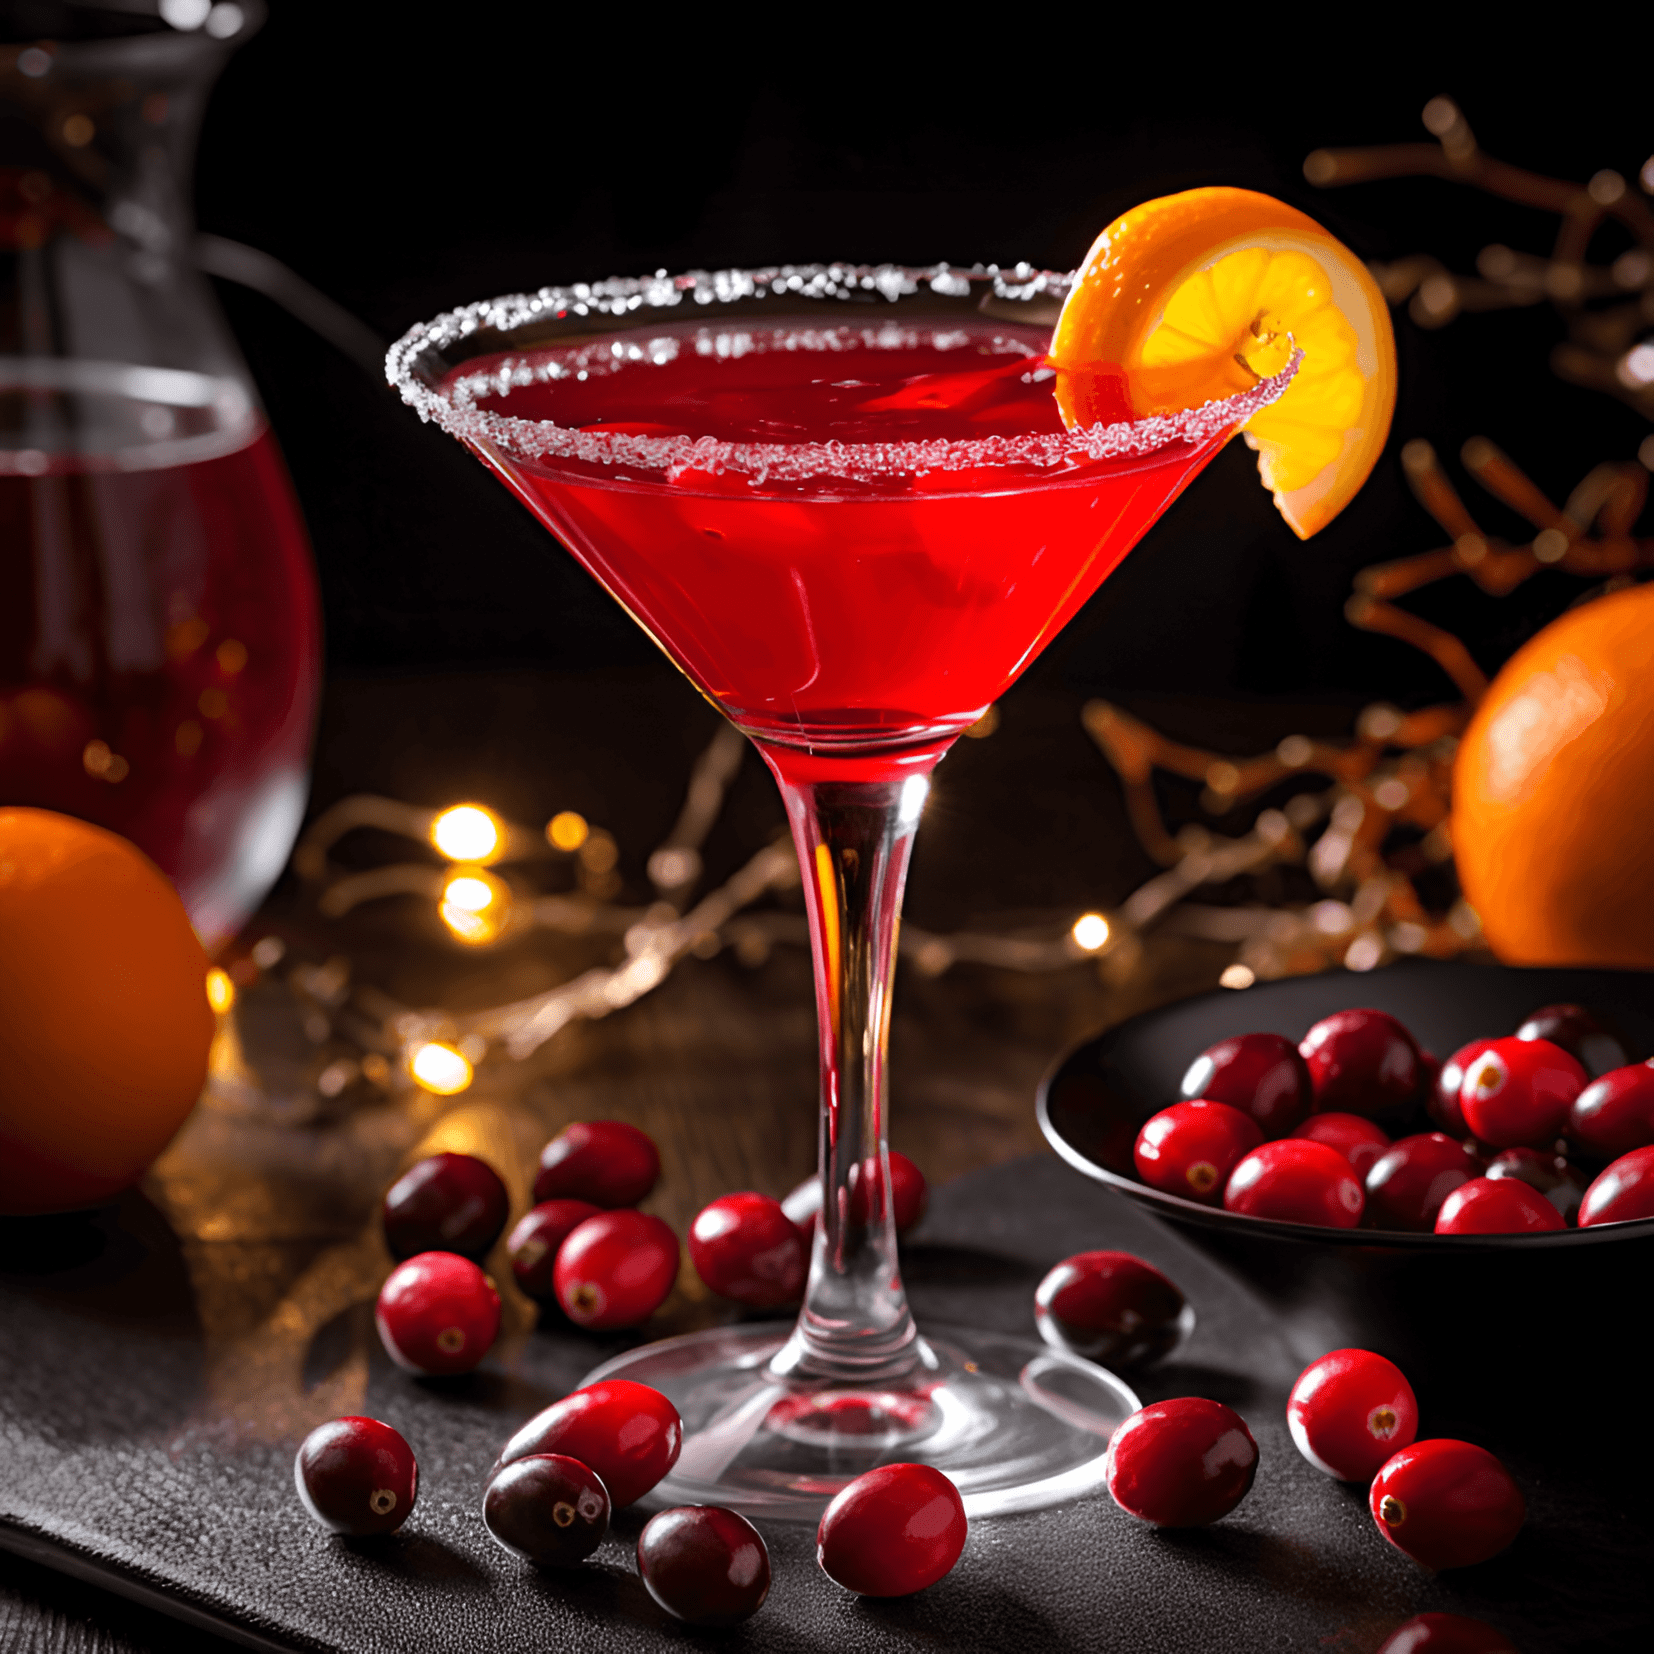 Cranberry Delight Cocktail Recipe - The Cranberry Delight cocktail is a perfect balance of sweet, tangy, and fruity flavors. The cranberry juice provides a tart and refreshing taste, while the orange liqueur adds a hint of sweetness. The vodka gives it a smooth and subtle kick, making it an easy-drinking and enjoyable cocktail.